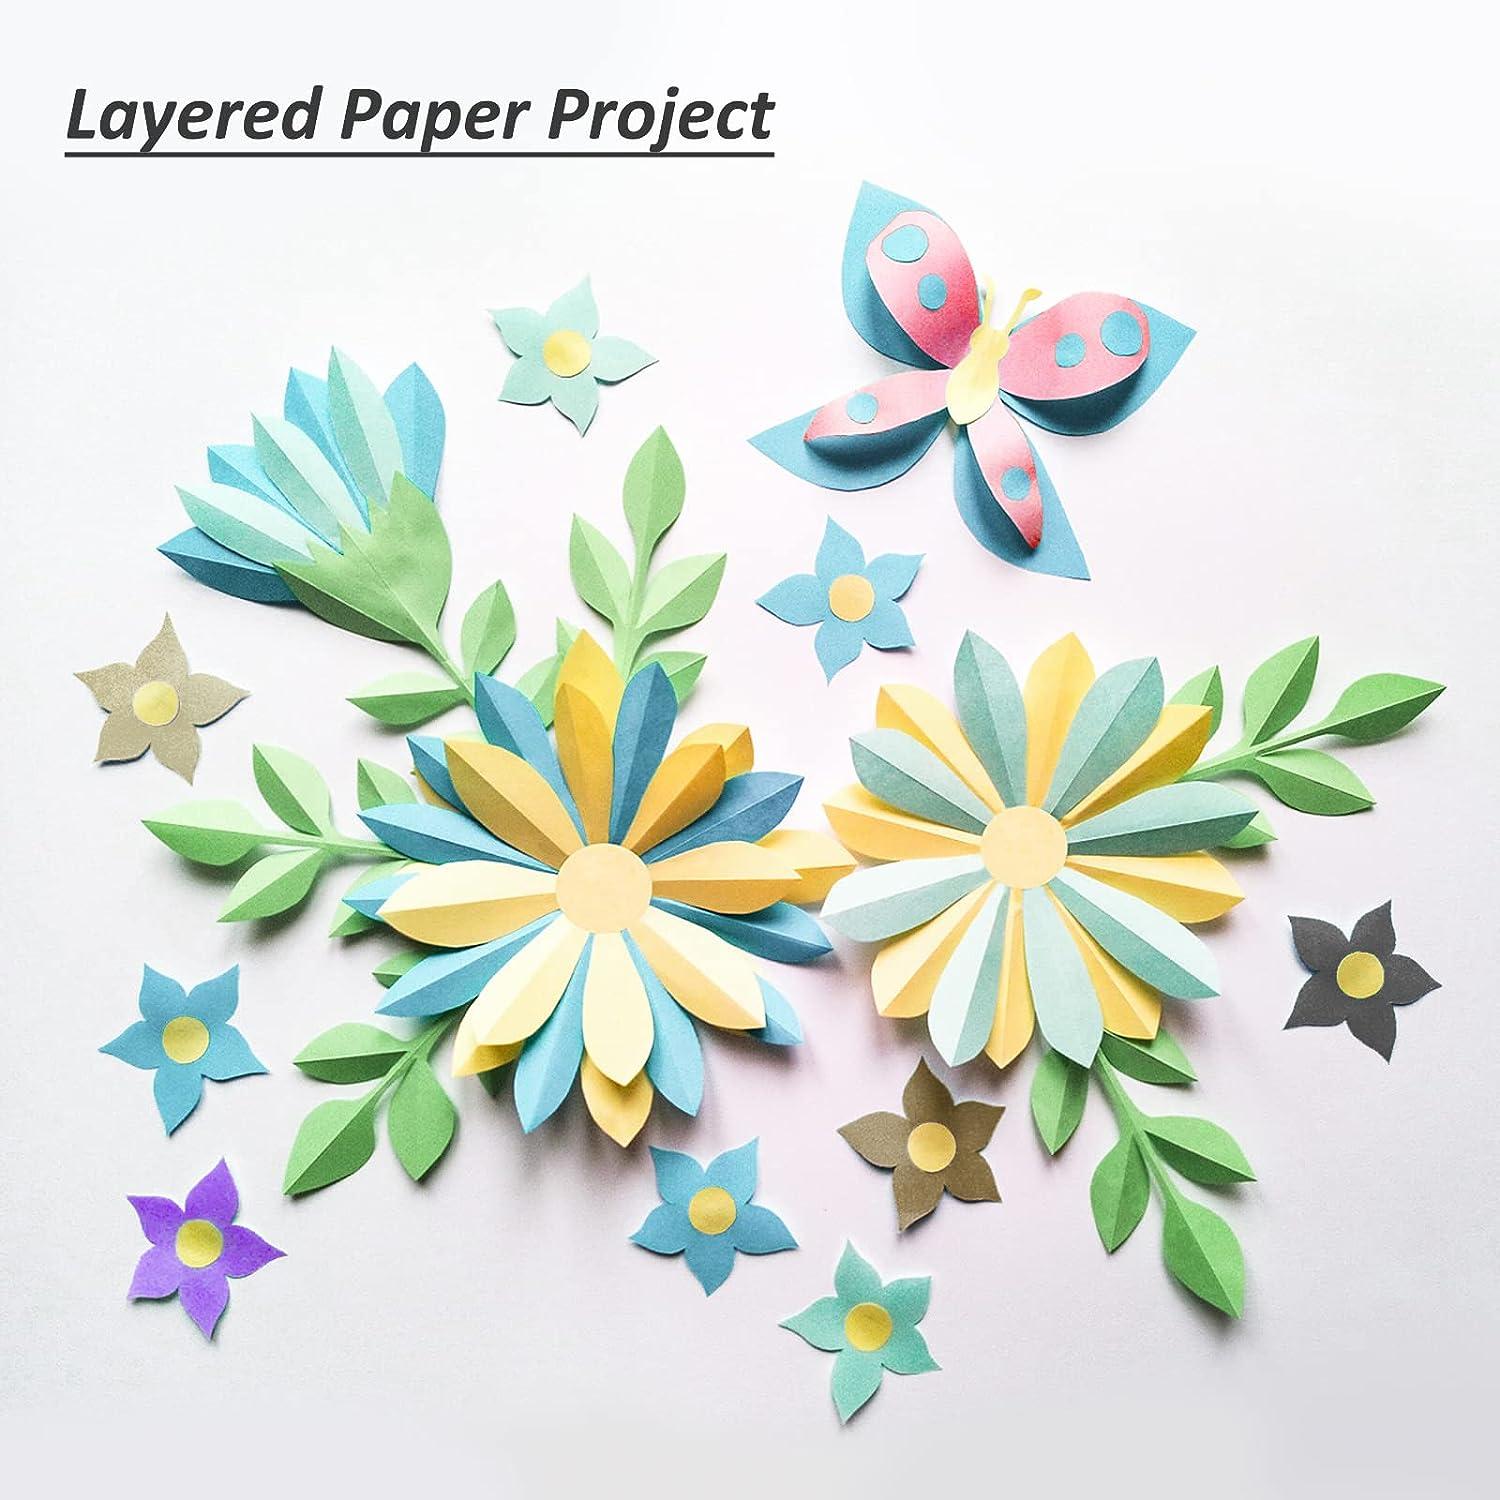 Colored Cardstock, Project & Scrapbooking Paper